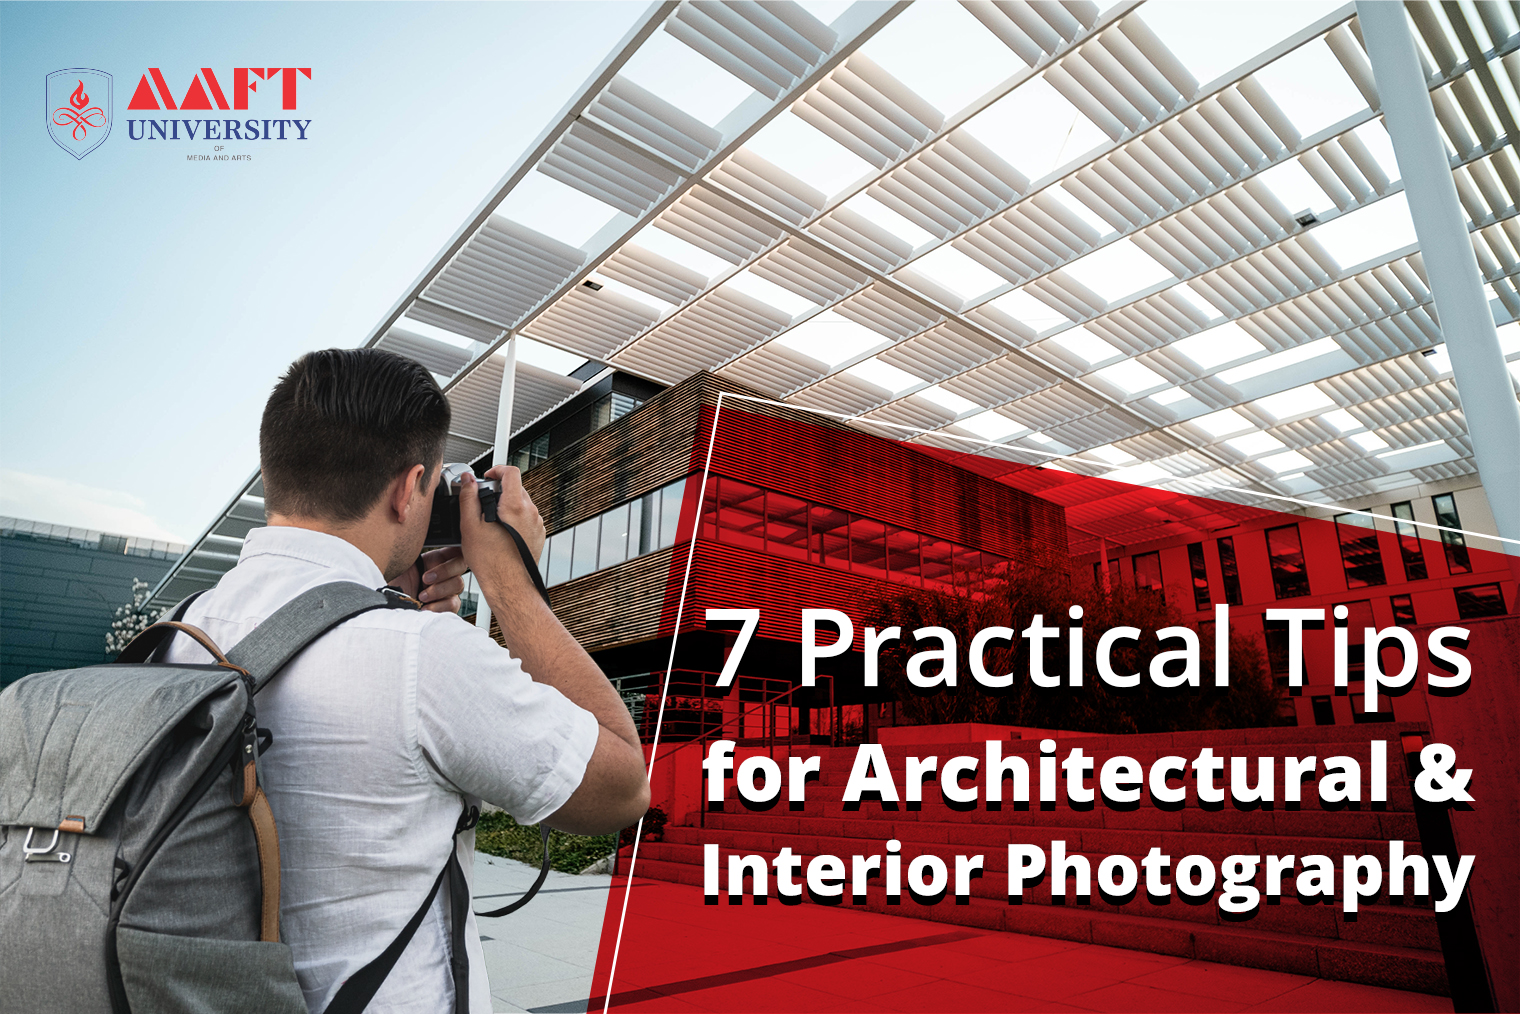 Tips for Architectural & Interior Photography